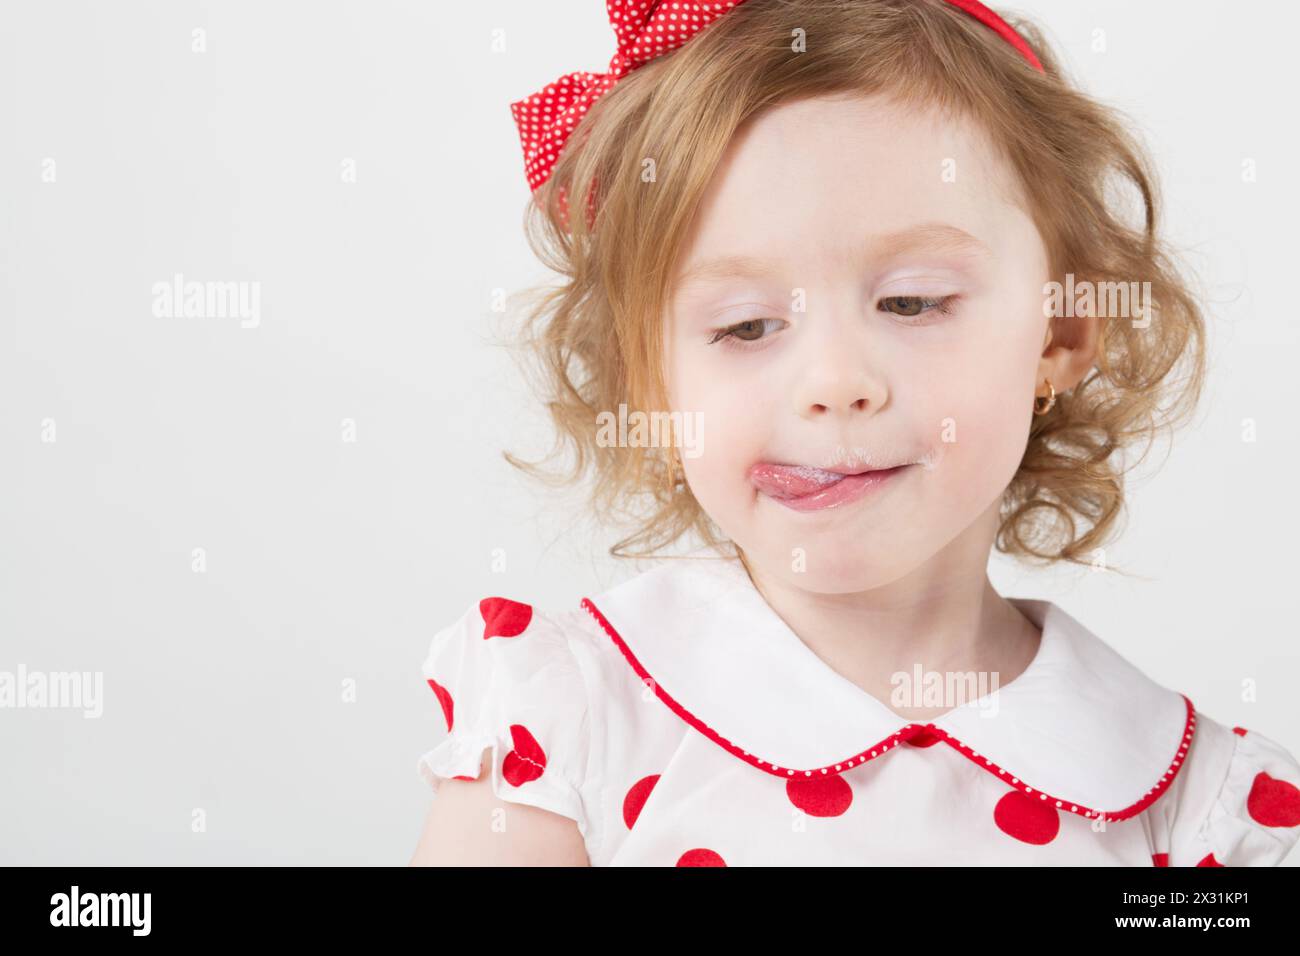 Little girl in a polka dot dress licking her lips covered with milk Stock Photo